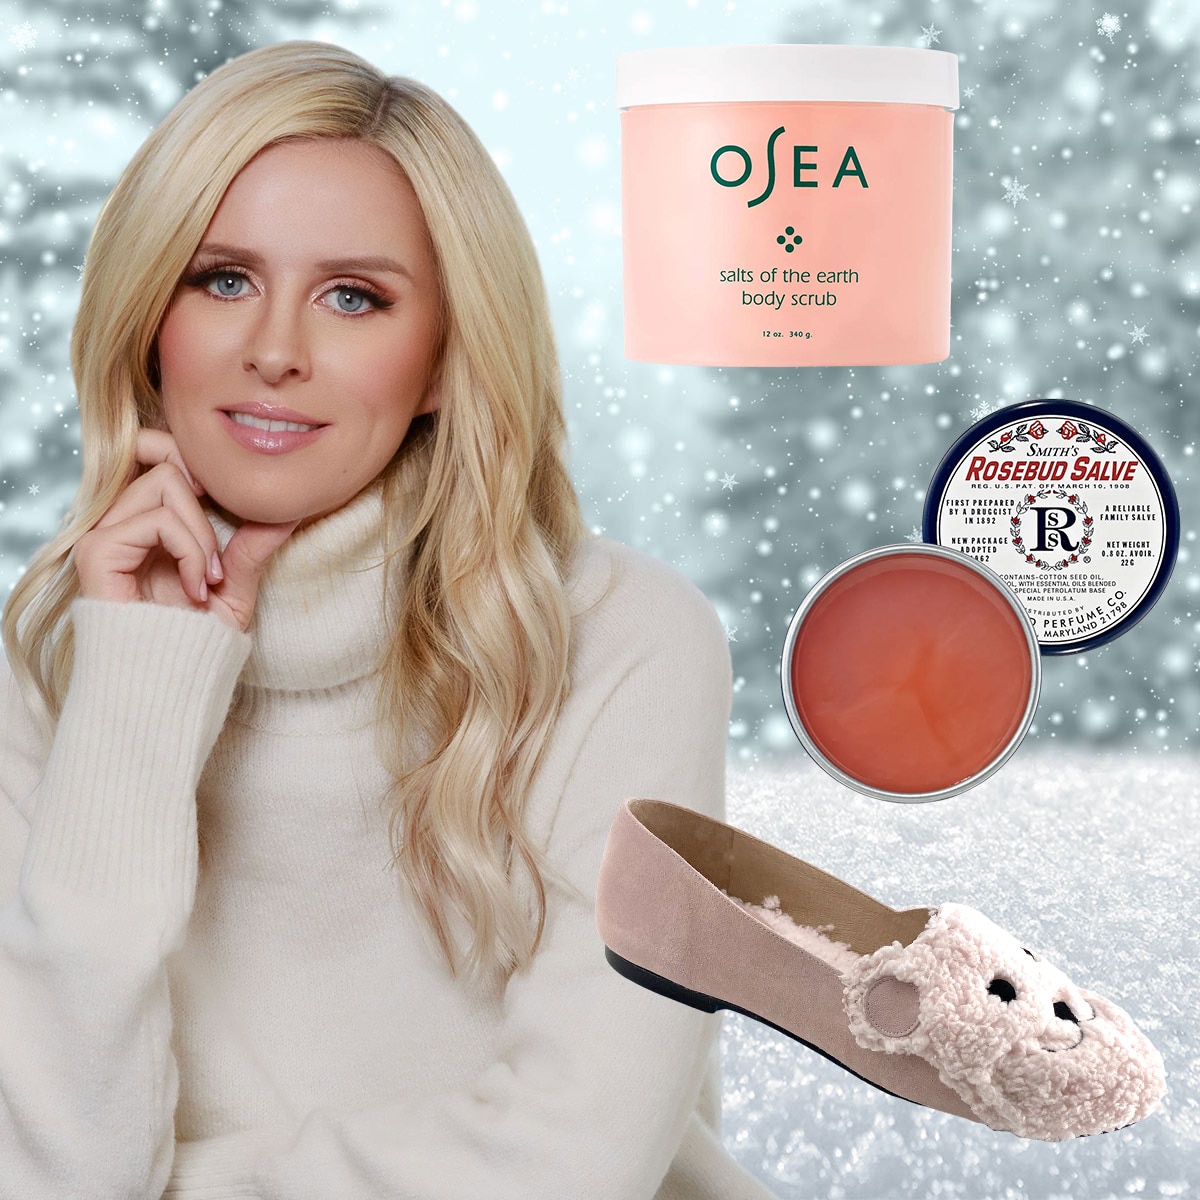 ECOMM, Nicky Hilton Holiday Gift Guide